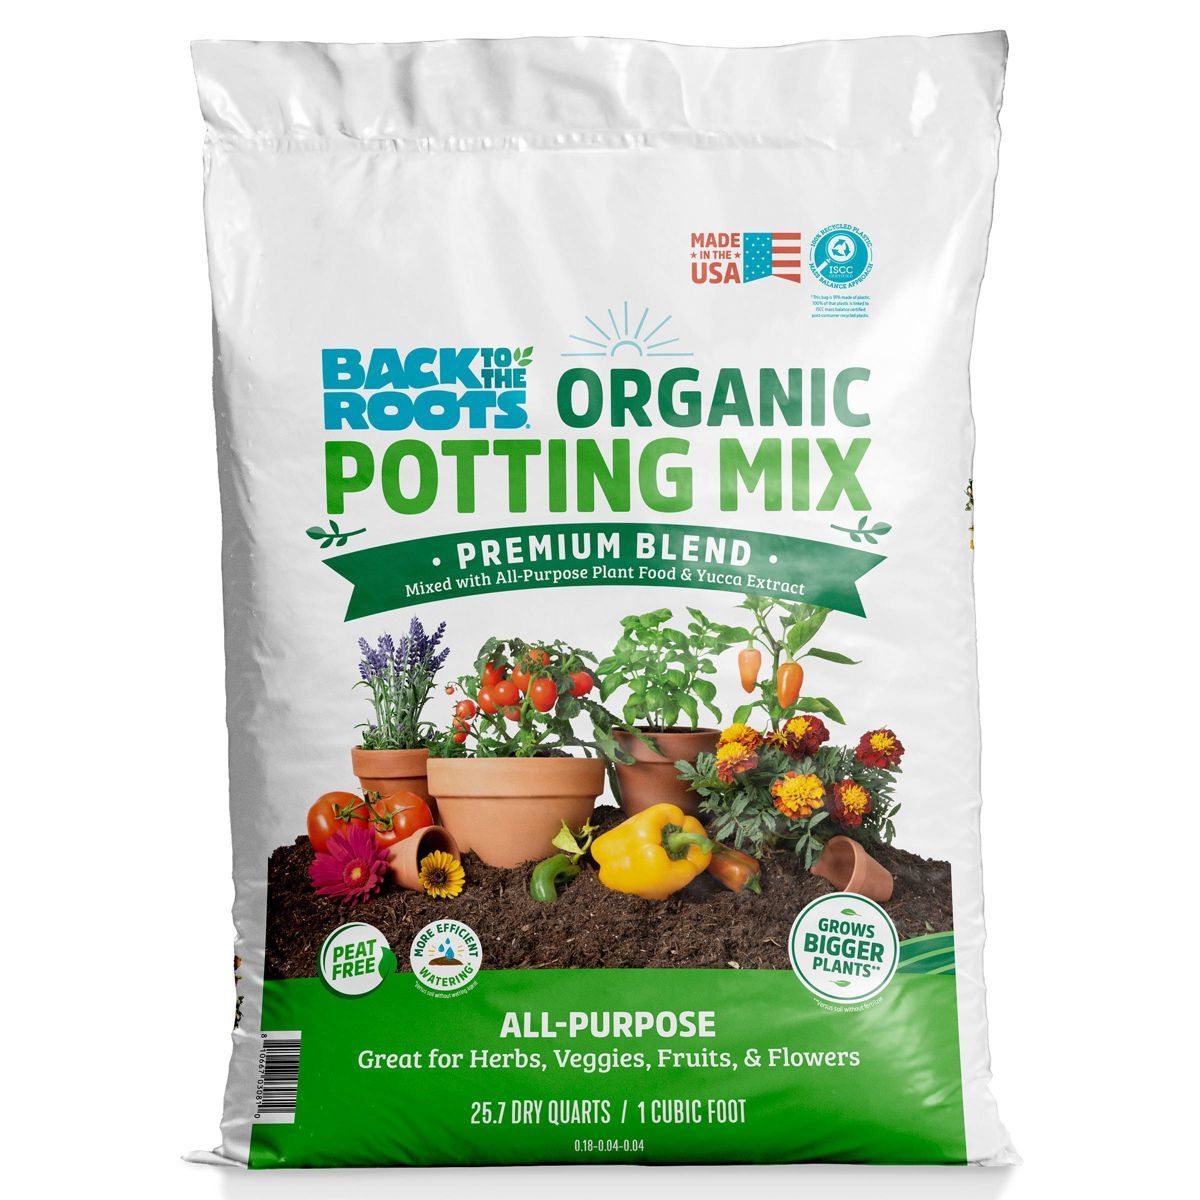 Back to the Roots 25.7qt Organic Potting Mix Premium Blend All Purpose | Target